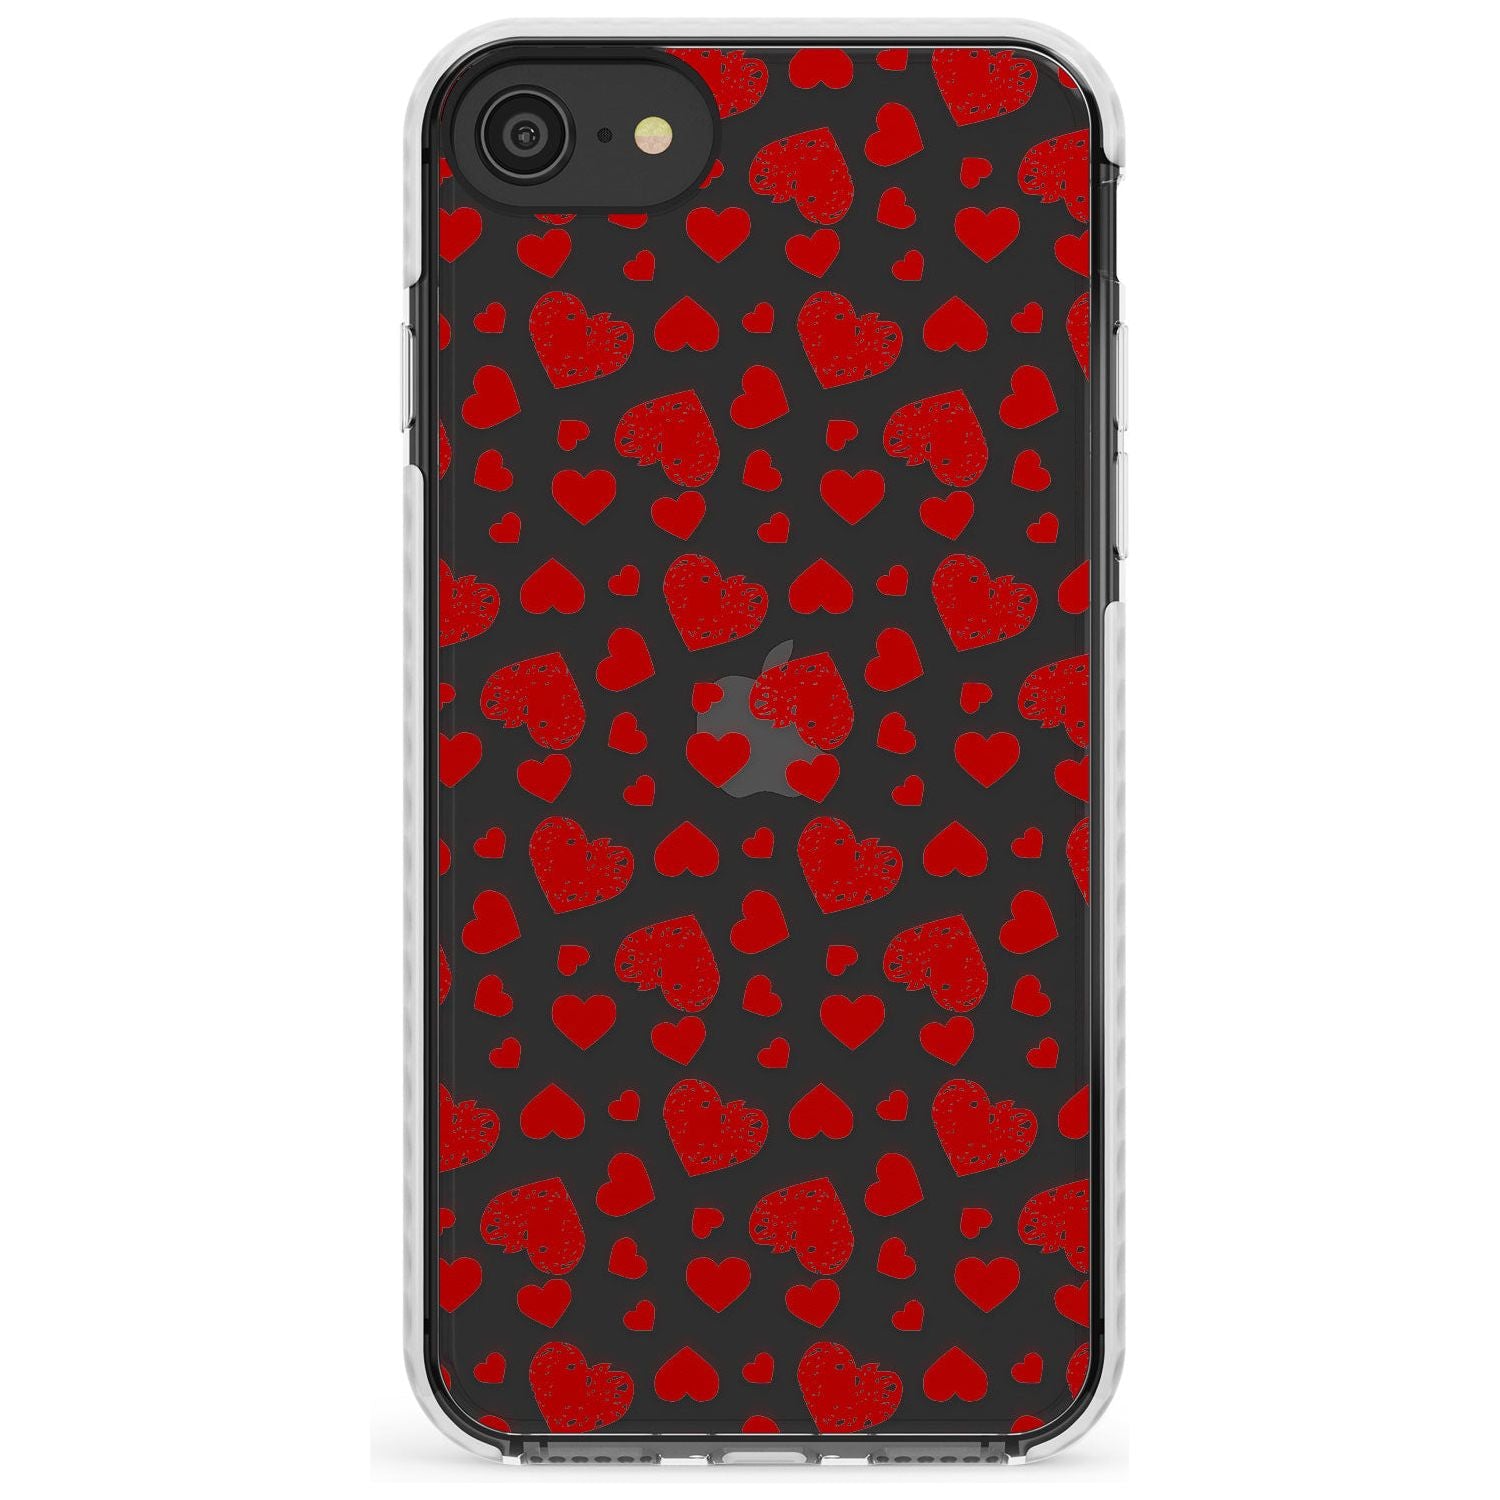 Sketched Heart Pattern Slim TPU Phone Case for iPhone SE 8 7 Plus